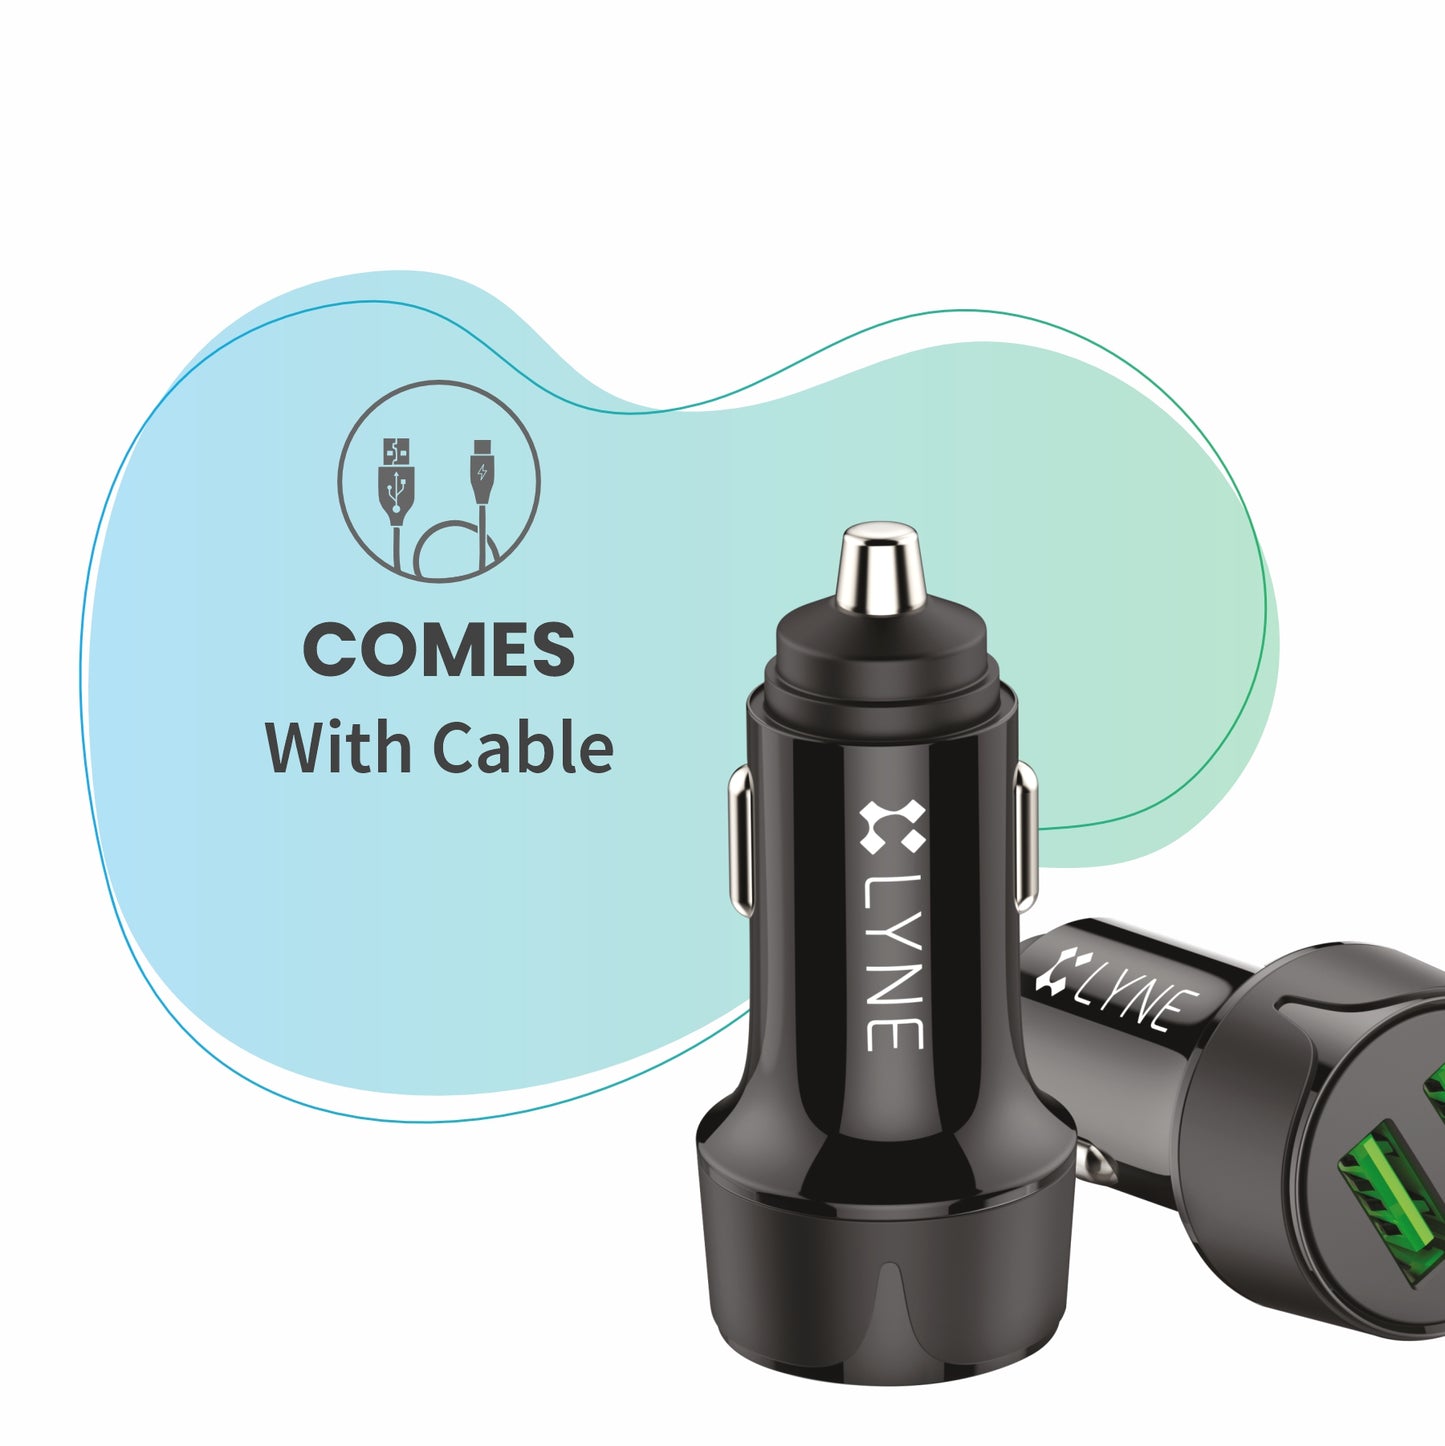 LYNE Piston 2 3.4A Output, Dual USB Port with Cable